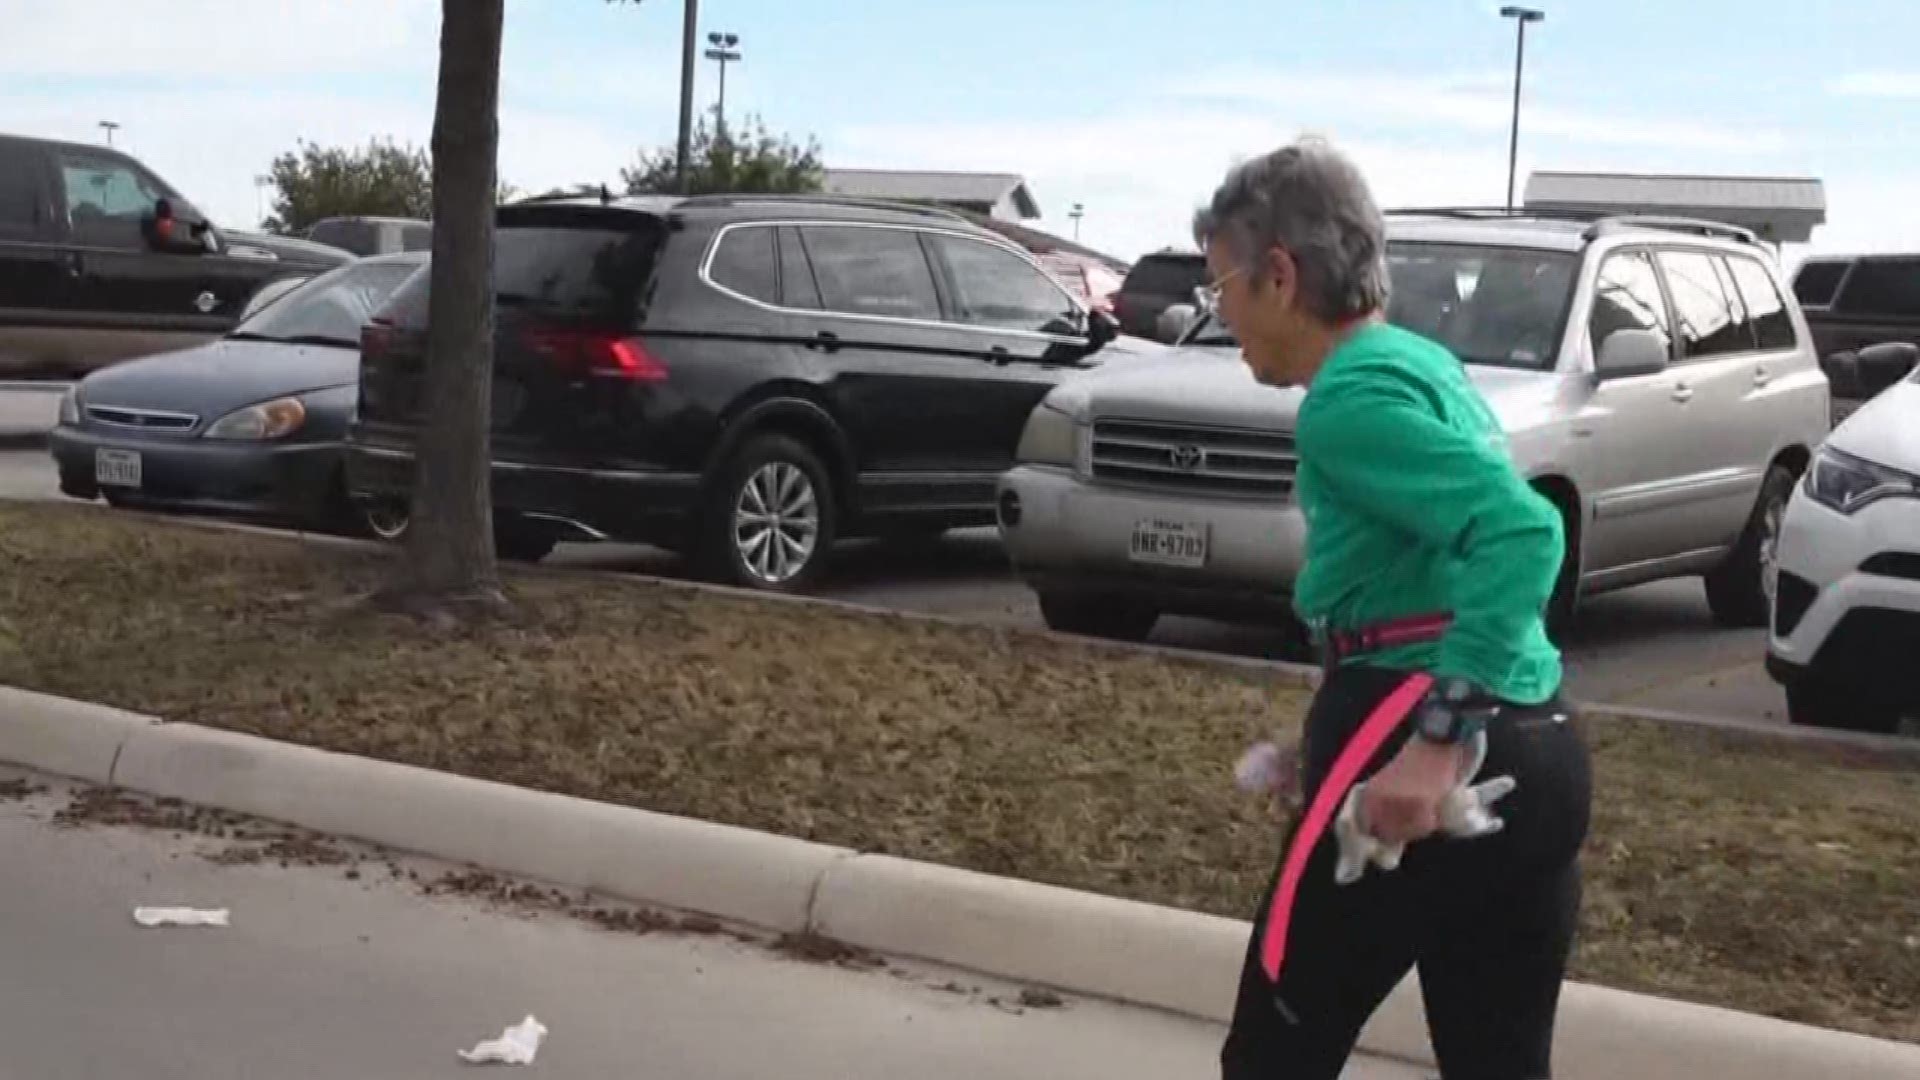 At 79 years old, Mary Kaplan has racked up hundreds of runs across the state, and she isn't planning on slowing down anytime soon.